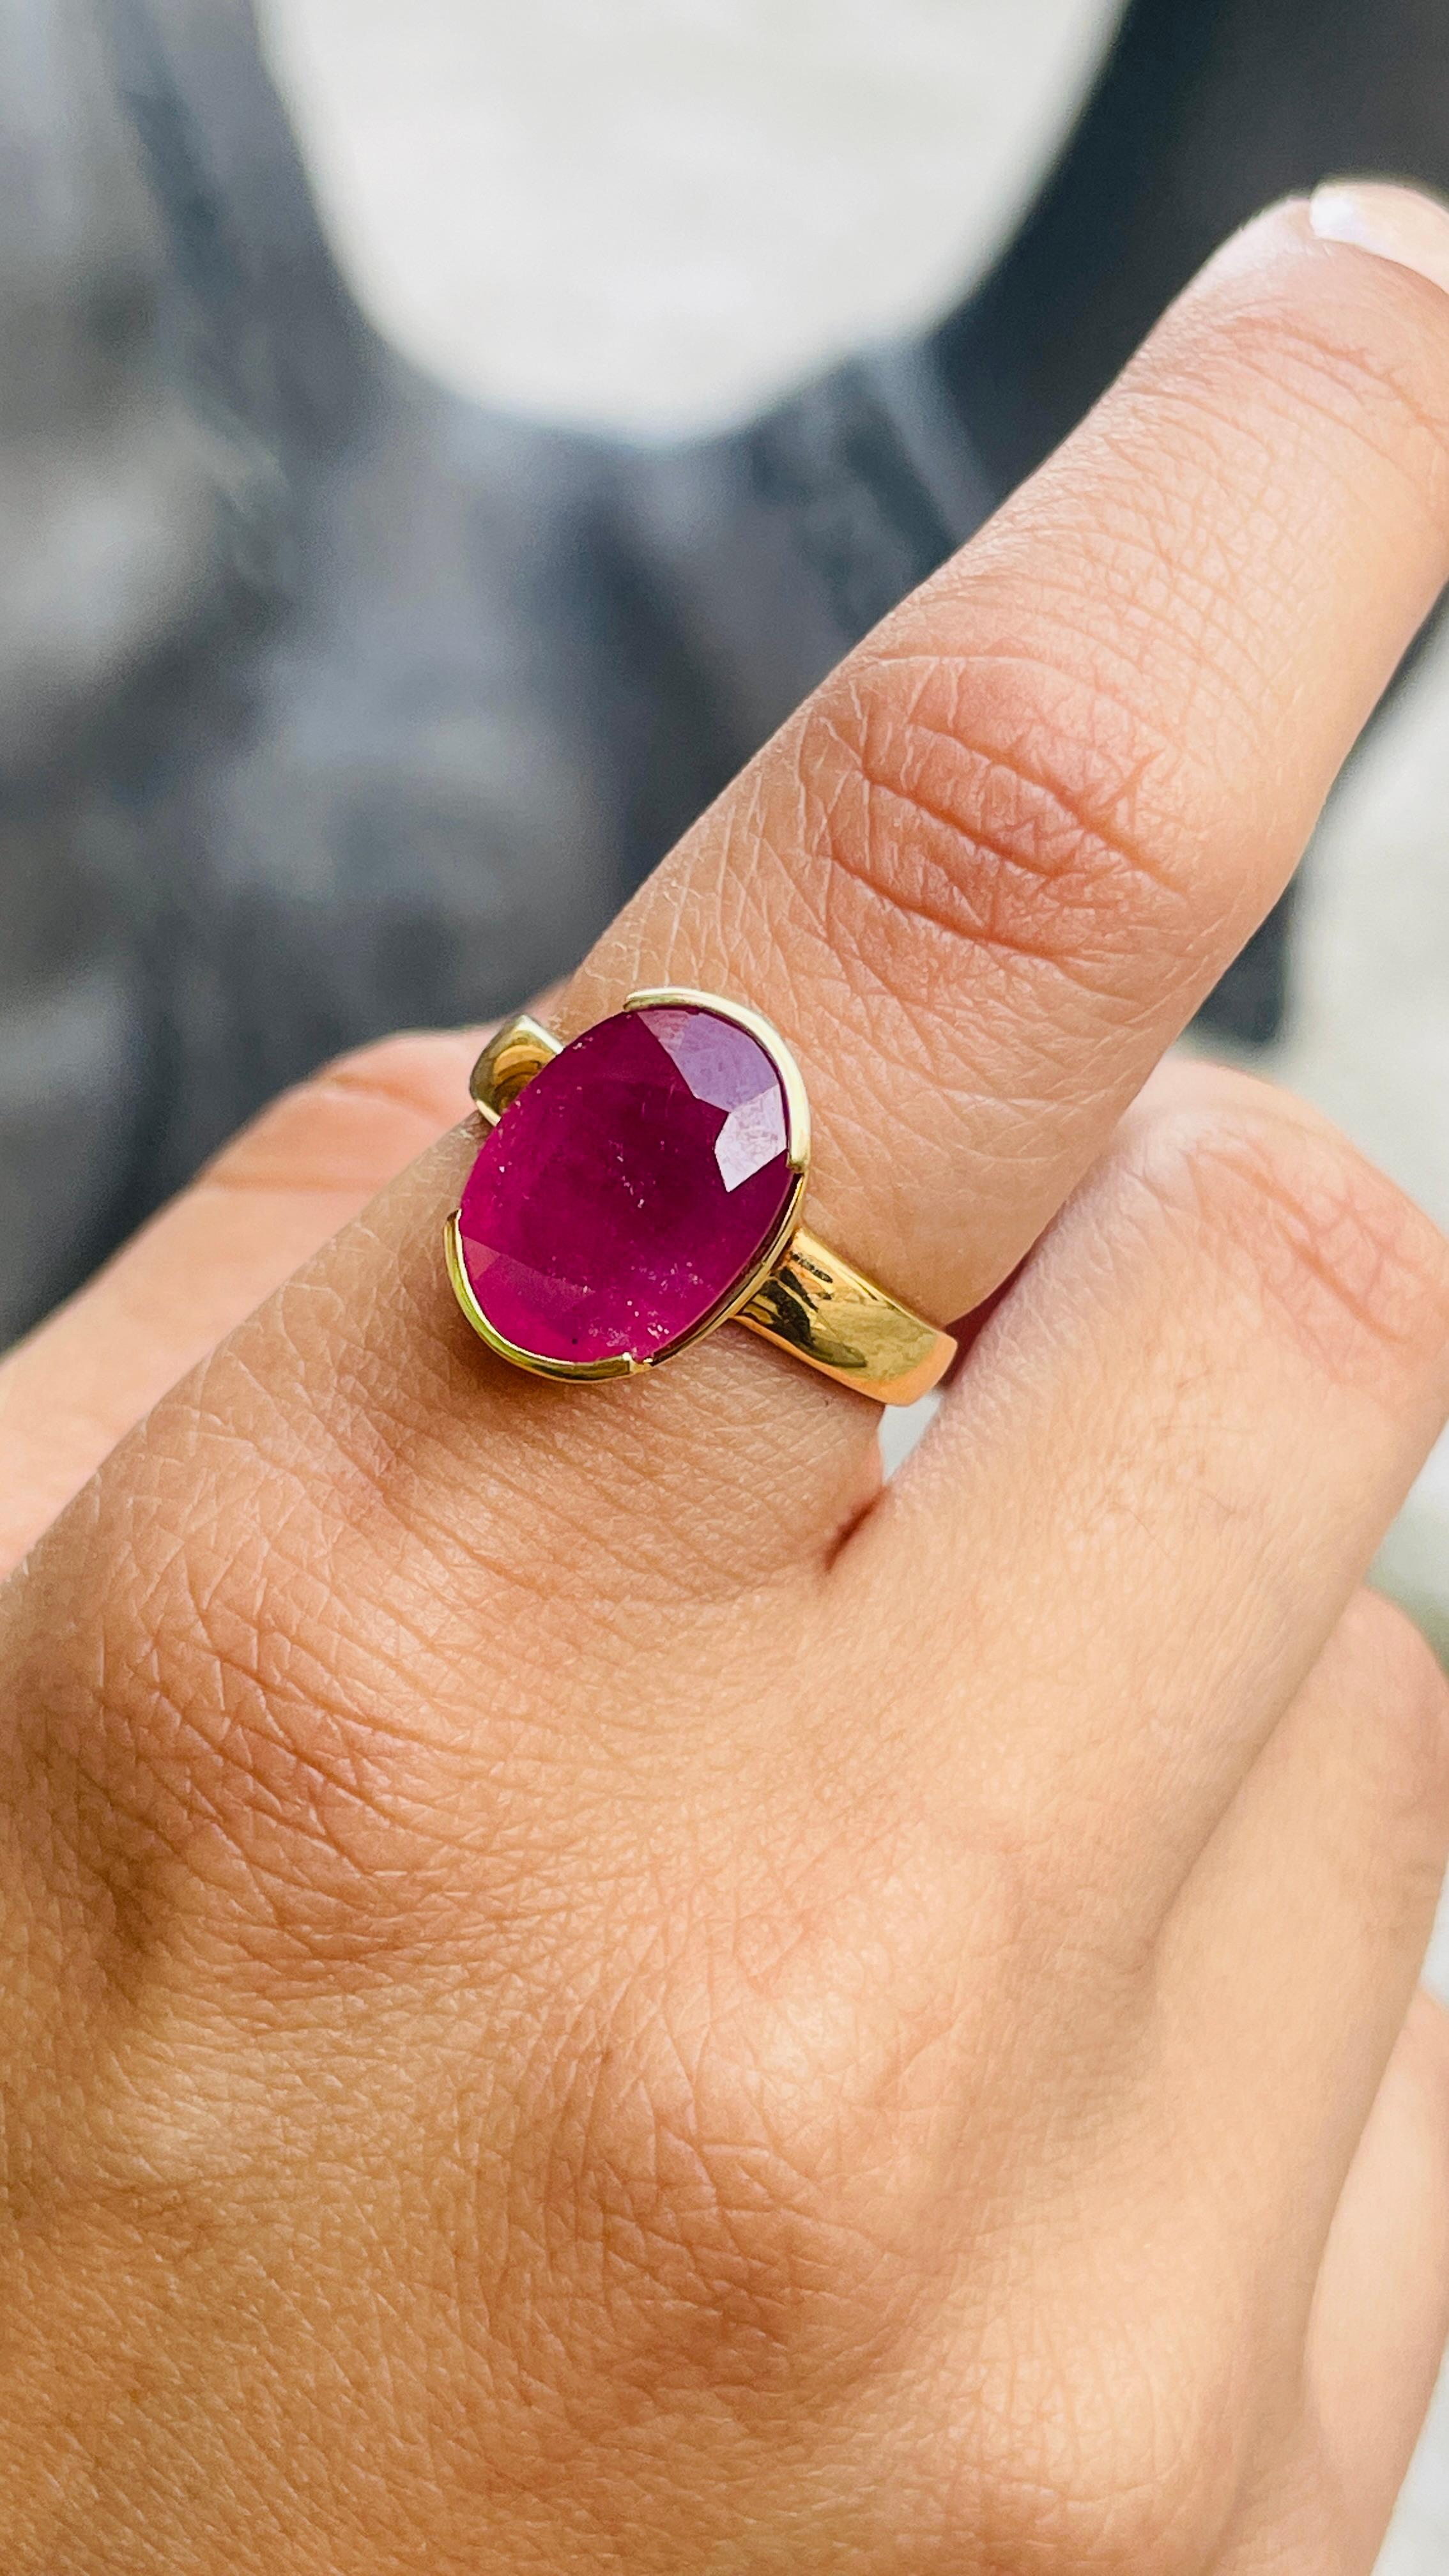 For Sale:  Contemporary Style 3.59 Carat Ruby Oval Cut Cocktail Ring in 14K Yellow Gold   10